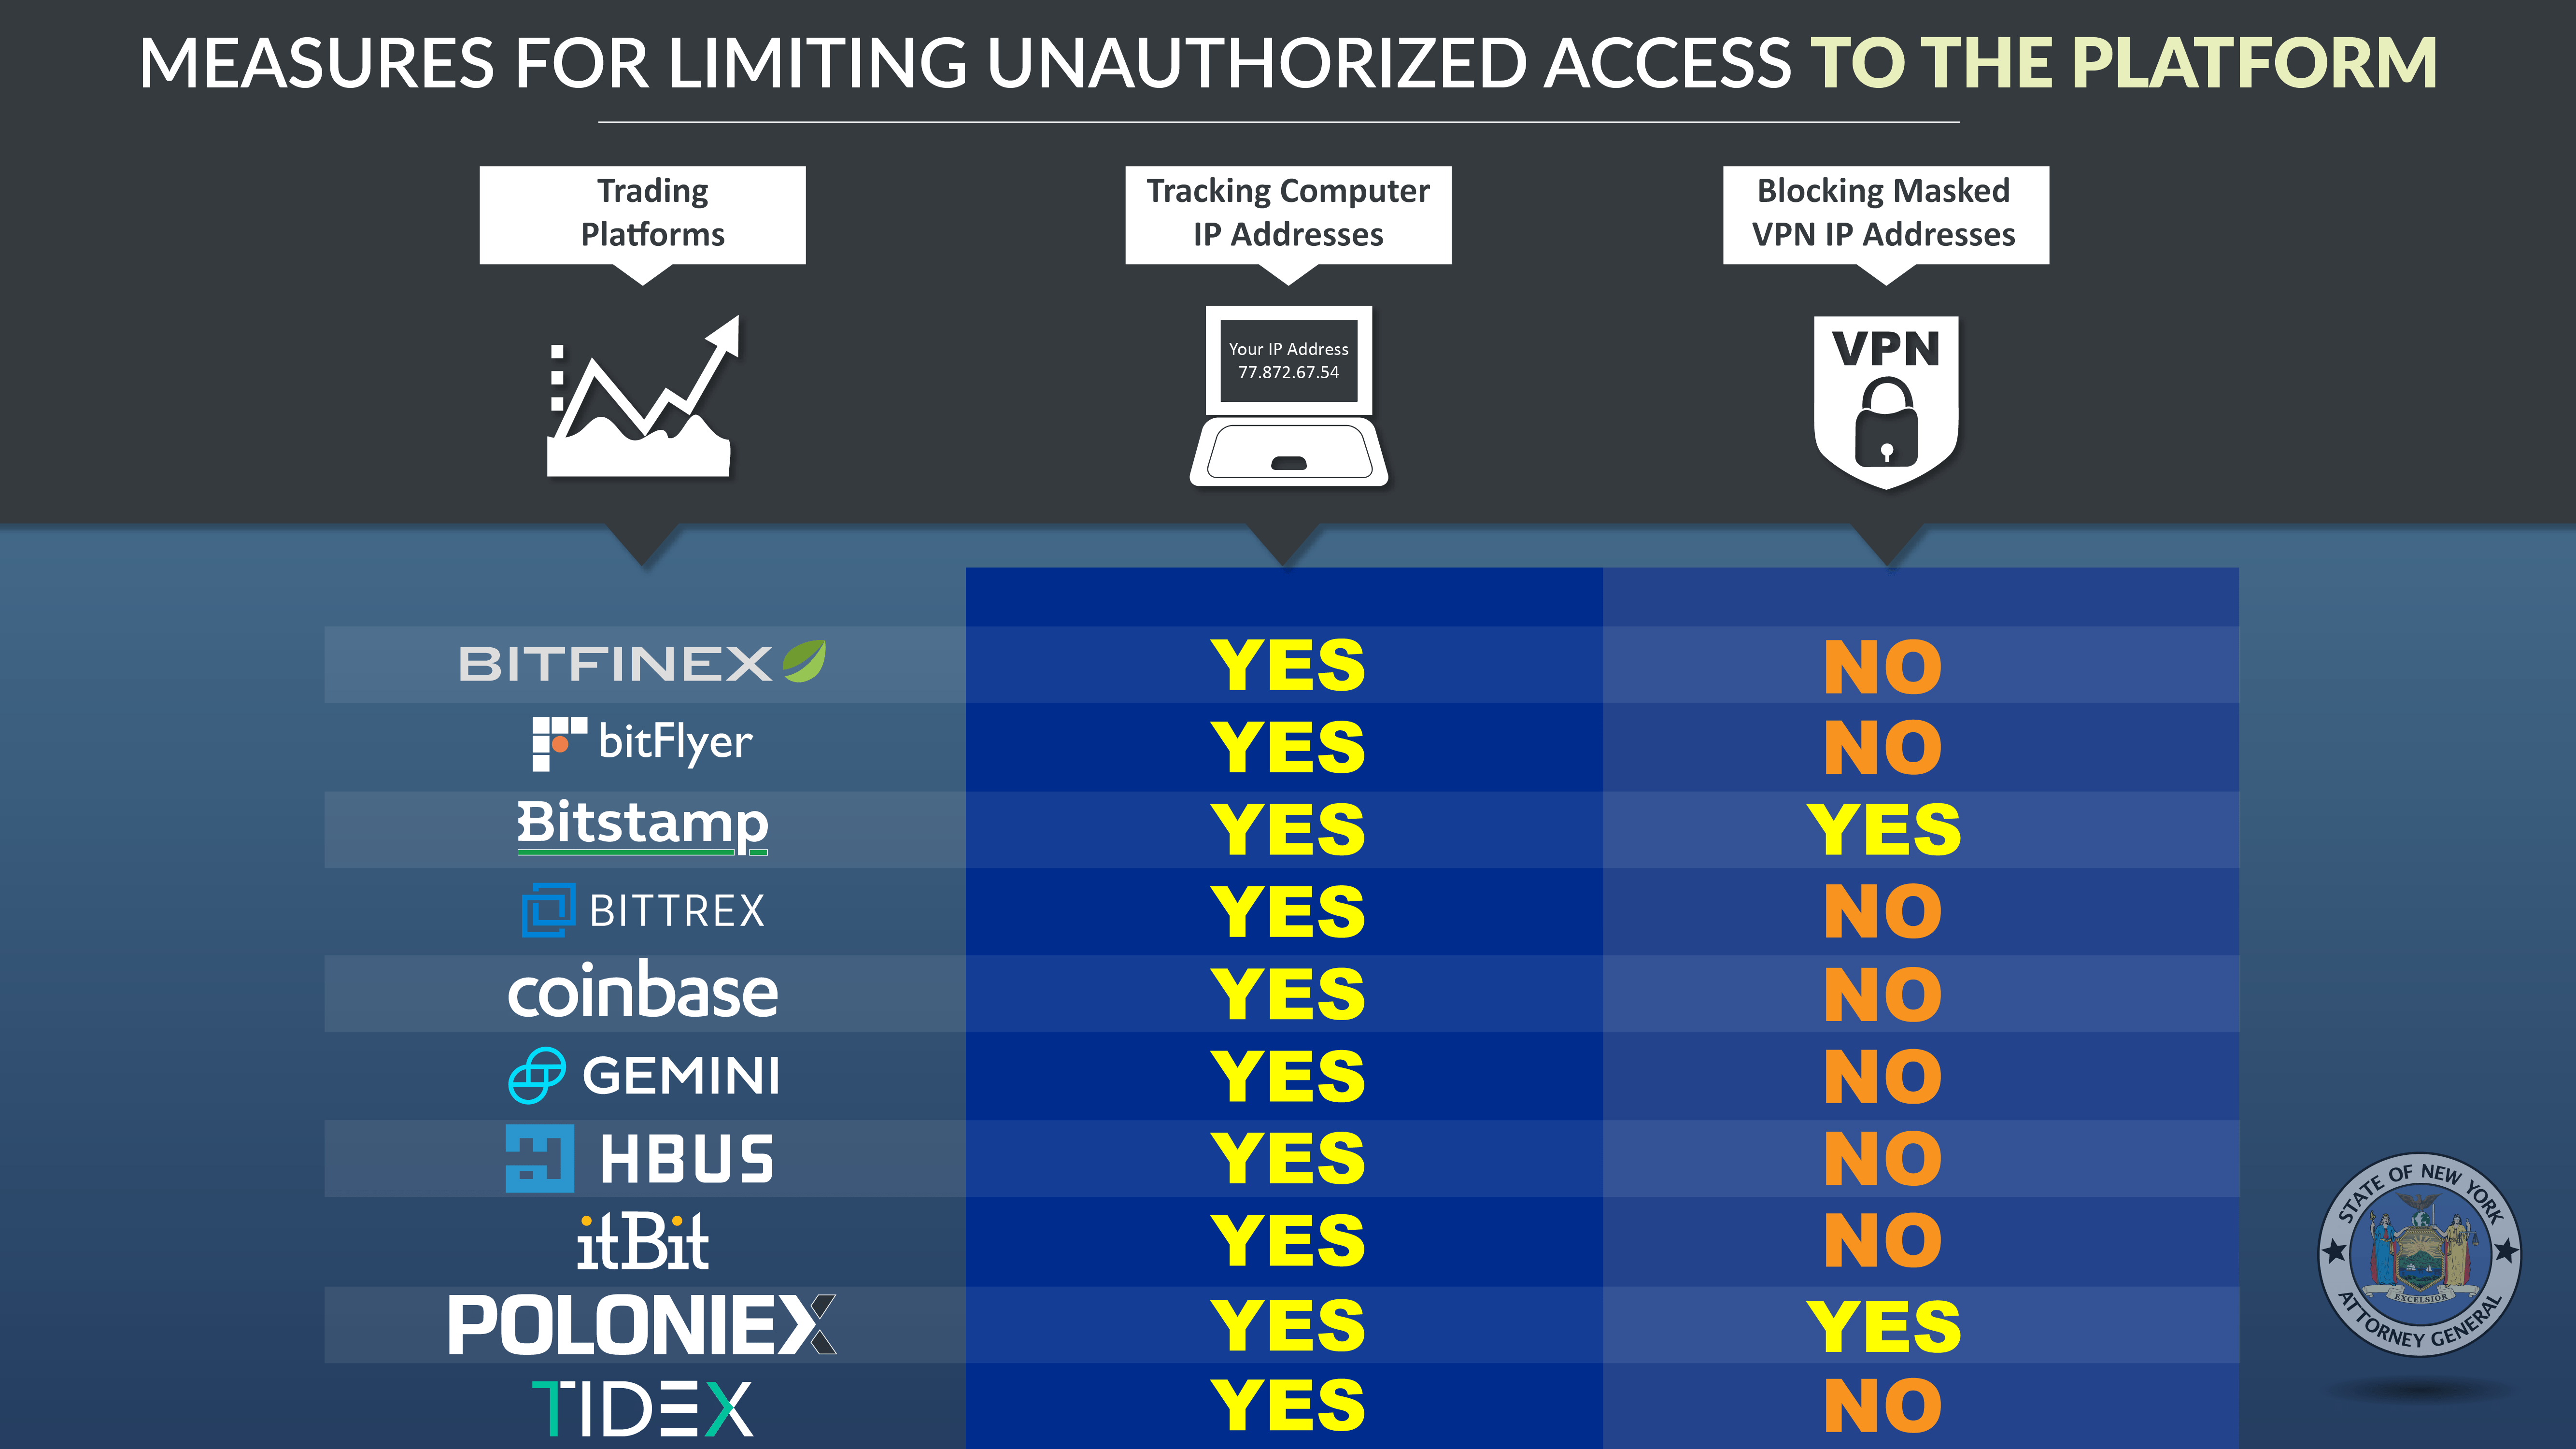 Measures for Limiting Unauthorized Access to the Platform